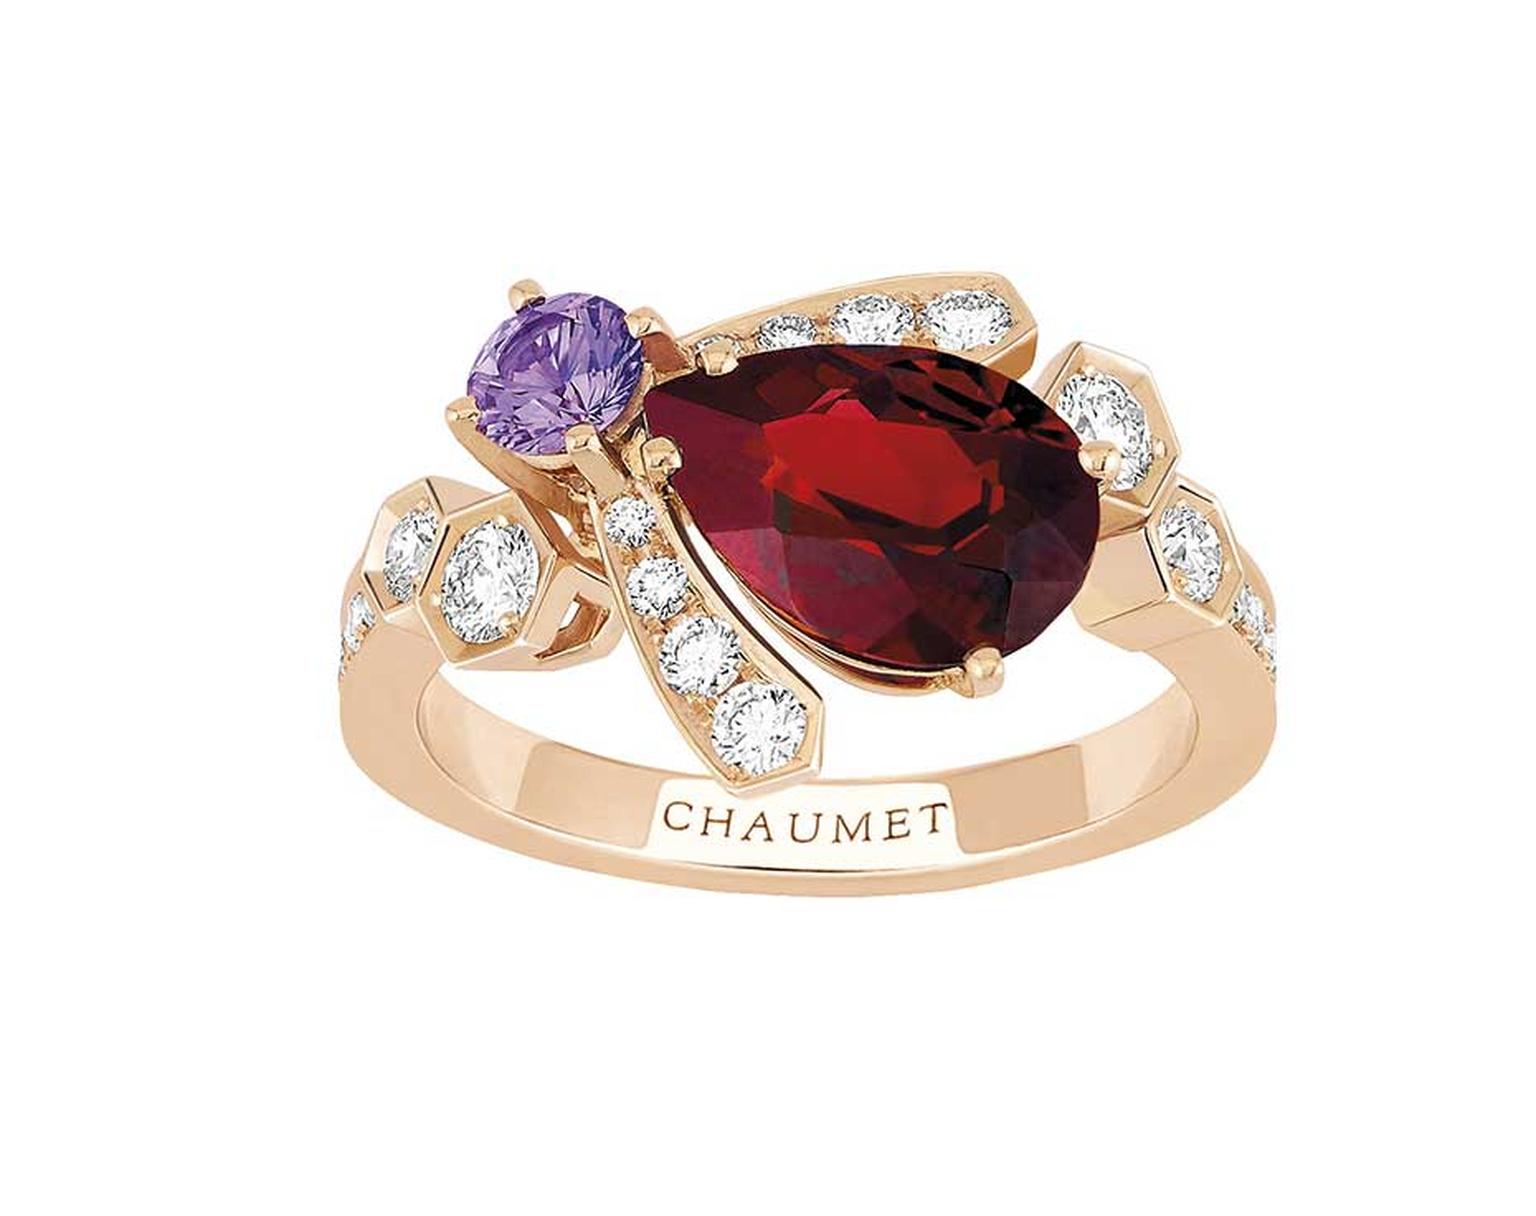 Chaumet ring in pink gold from the Bee My Love collection, set with a pyrope garnet, sapphire and diamonds.